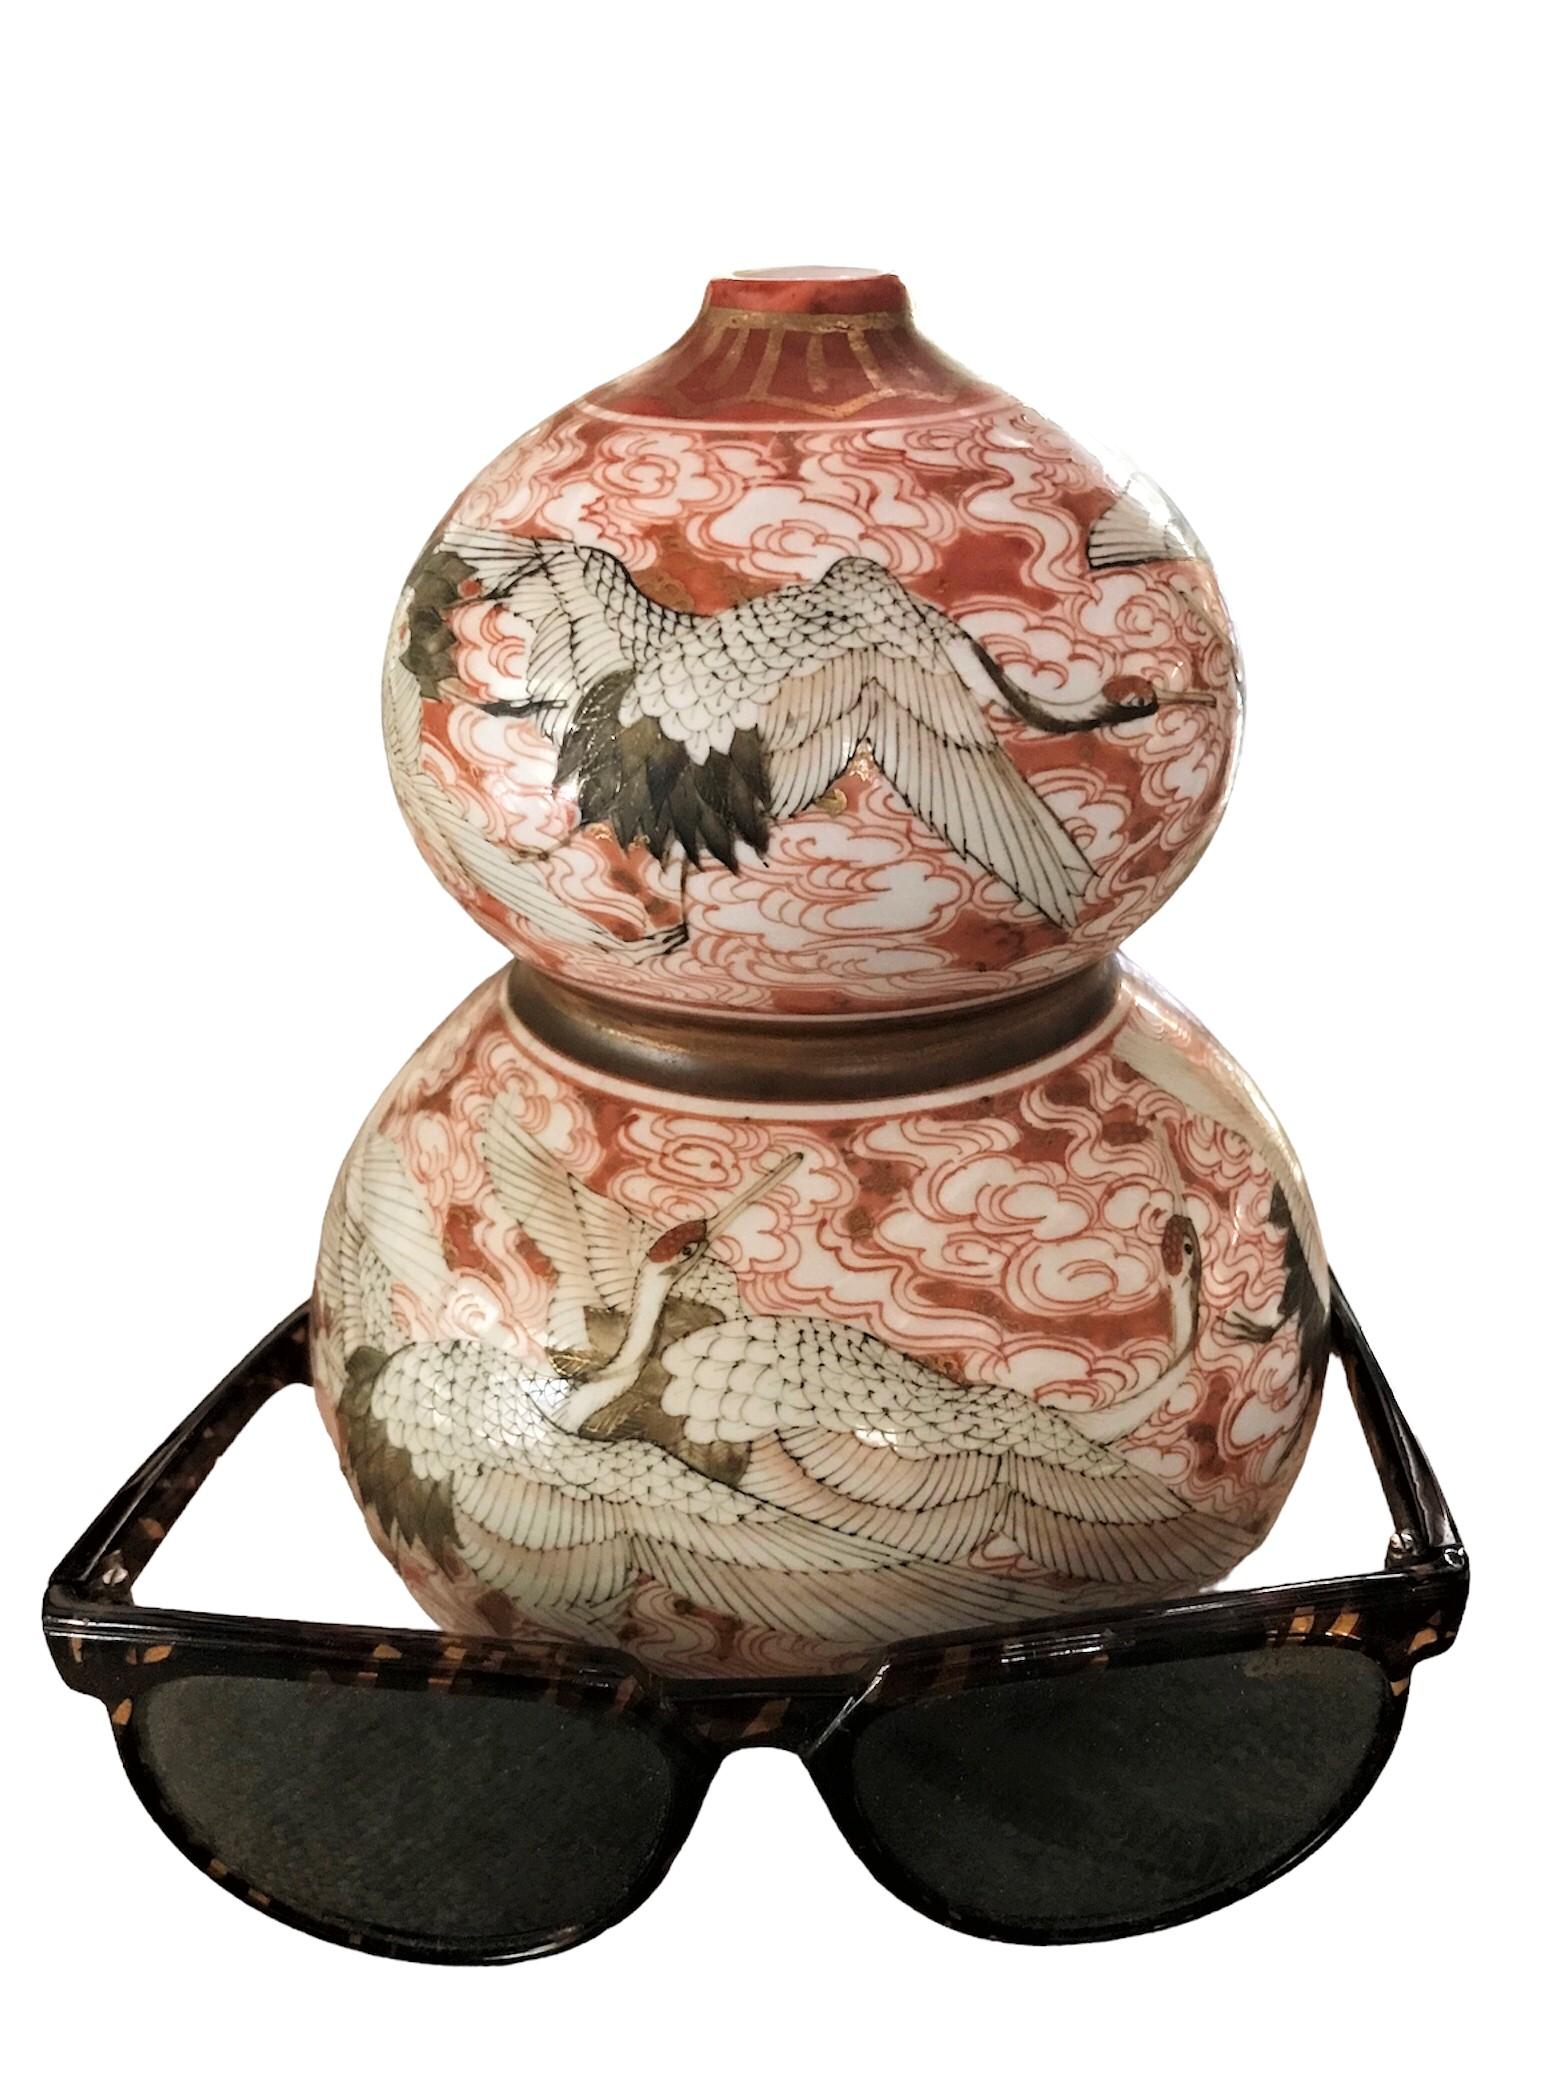 Exotic gourd shape Kutani ceramic vase with flying Cranes decoration from Mid Century Japan.  The hand painting was done with great care and artistic knowledge.  The vase is painted with swirling clouds decoration with 4 single cranes in the upper